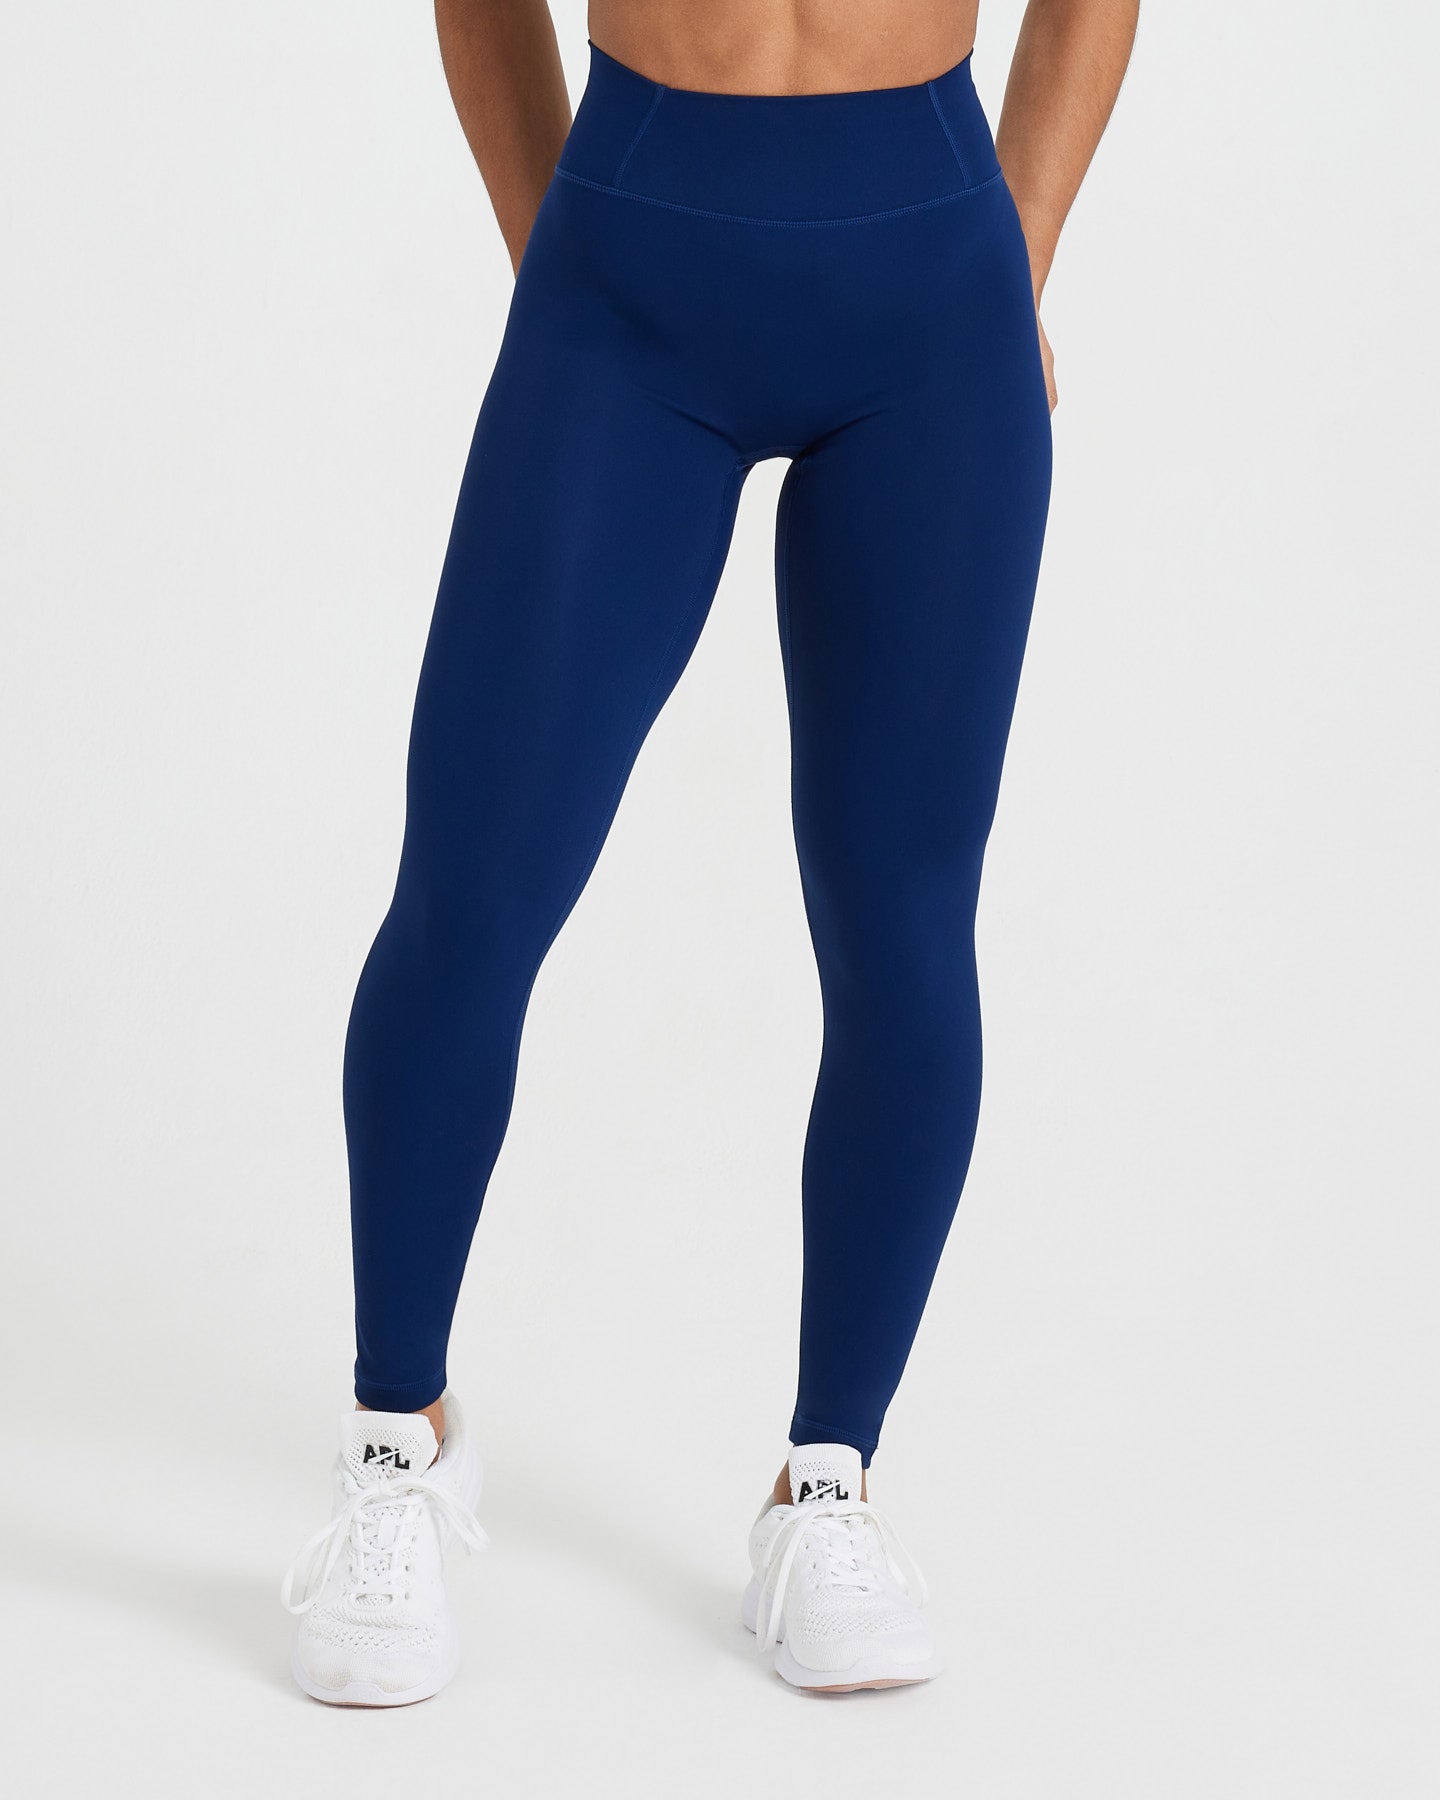 Women's Leggings with ultimate Glute Separation | Oner Active